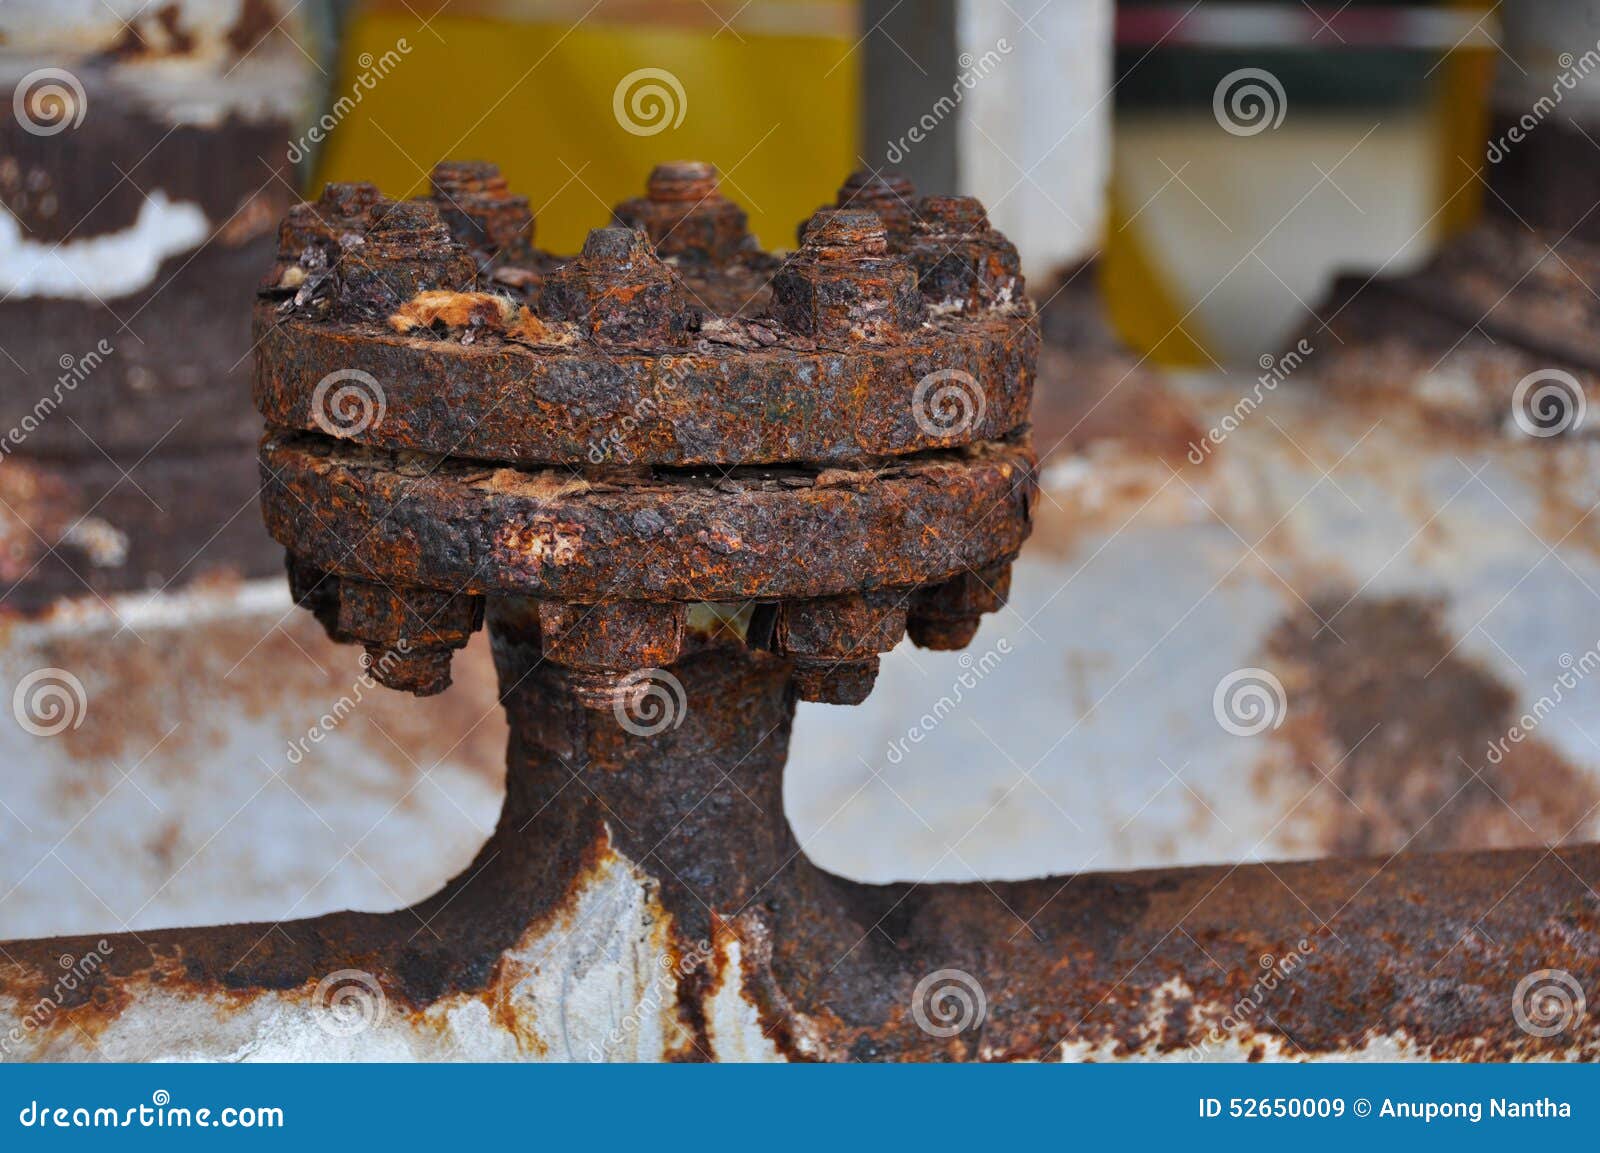 close up old flange in oil and gas industry. equipment in production process. dust on equipment or flange